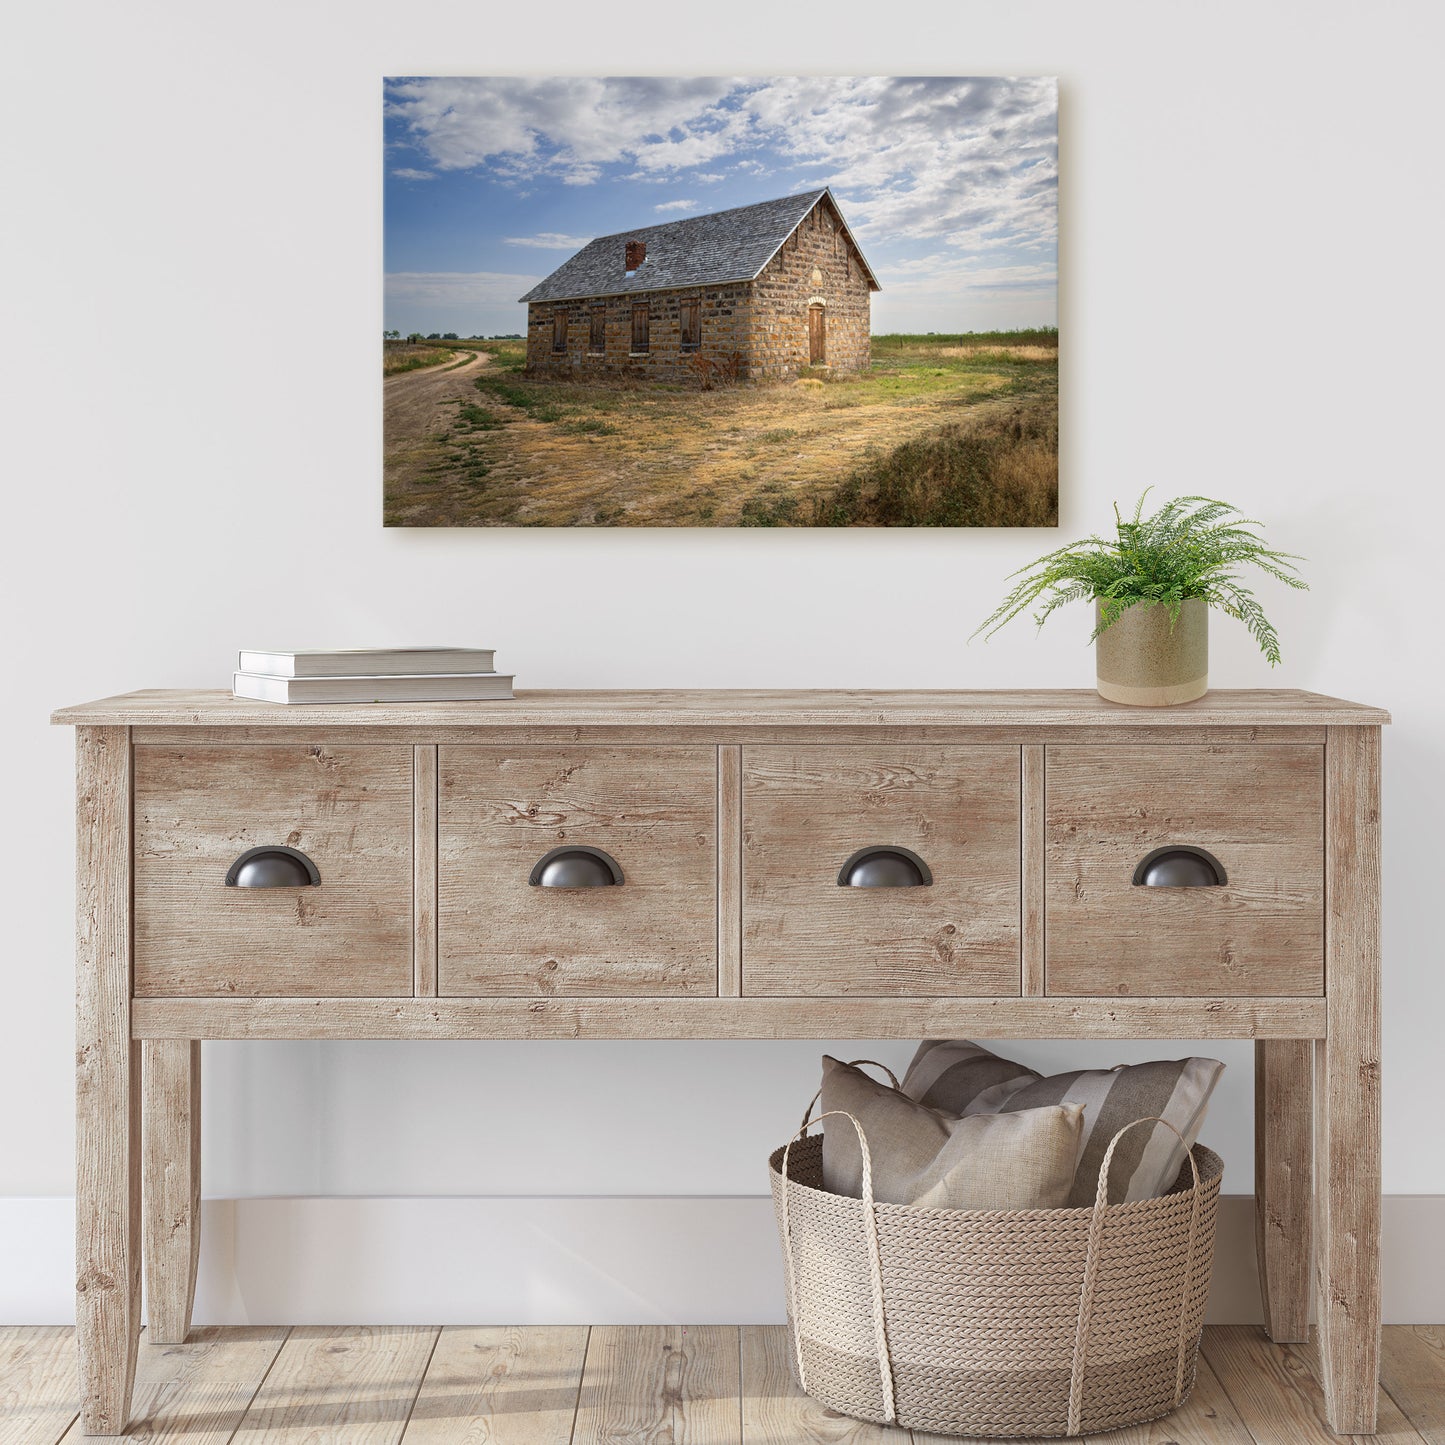 Wall art canvas featuring Star Schoolhouse in Bent county Colorado